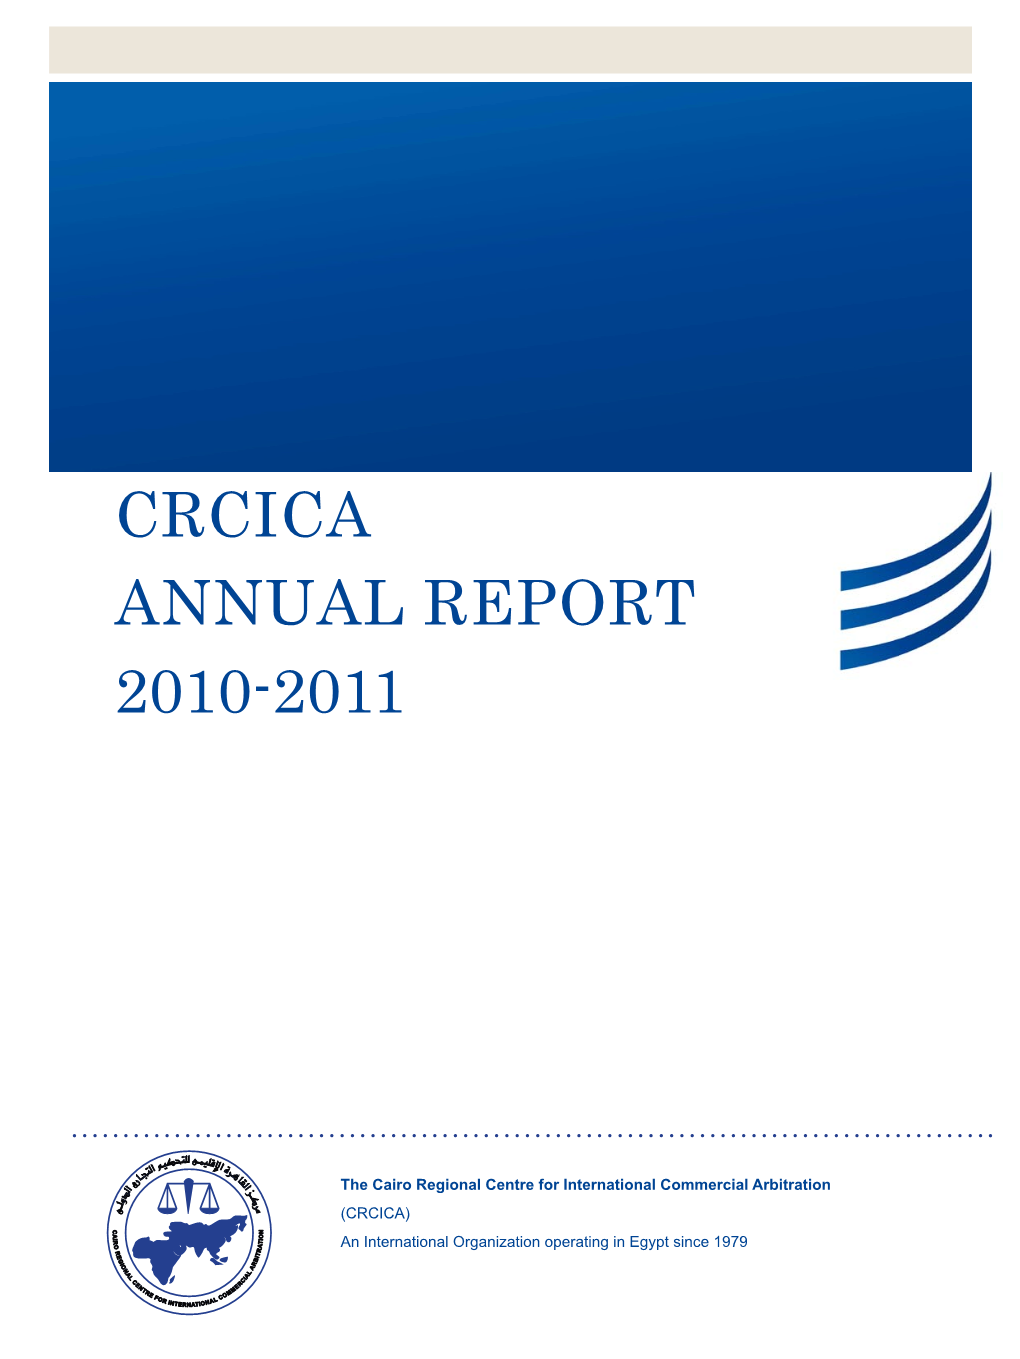 Crcica Annual Report 2010-2011